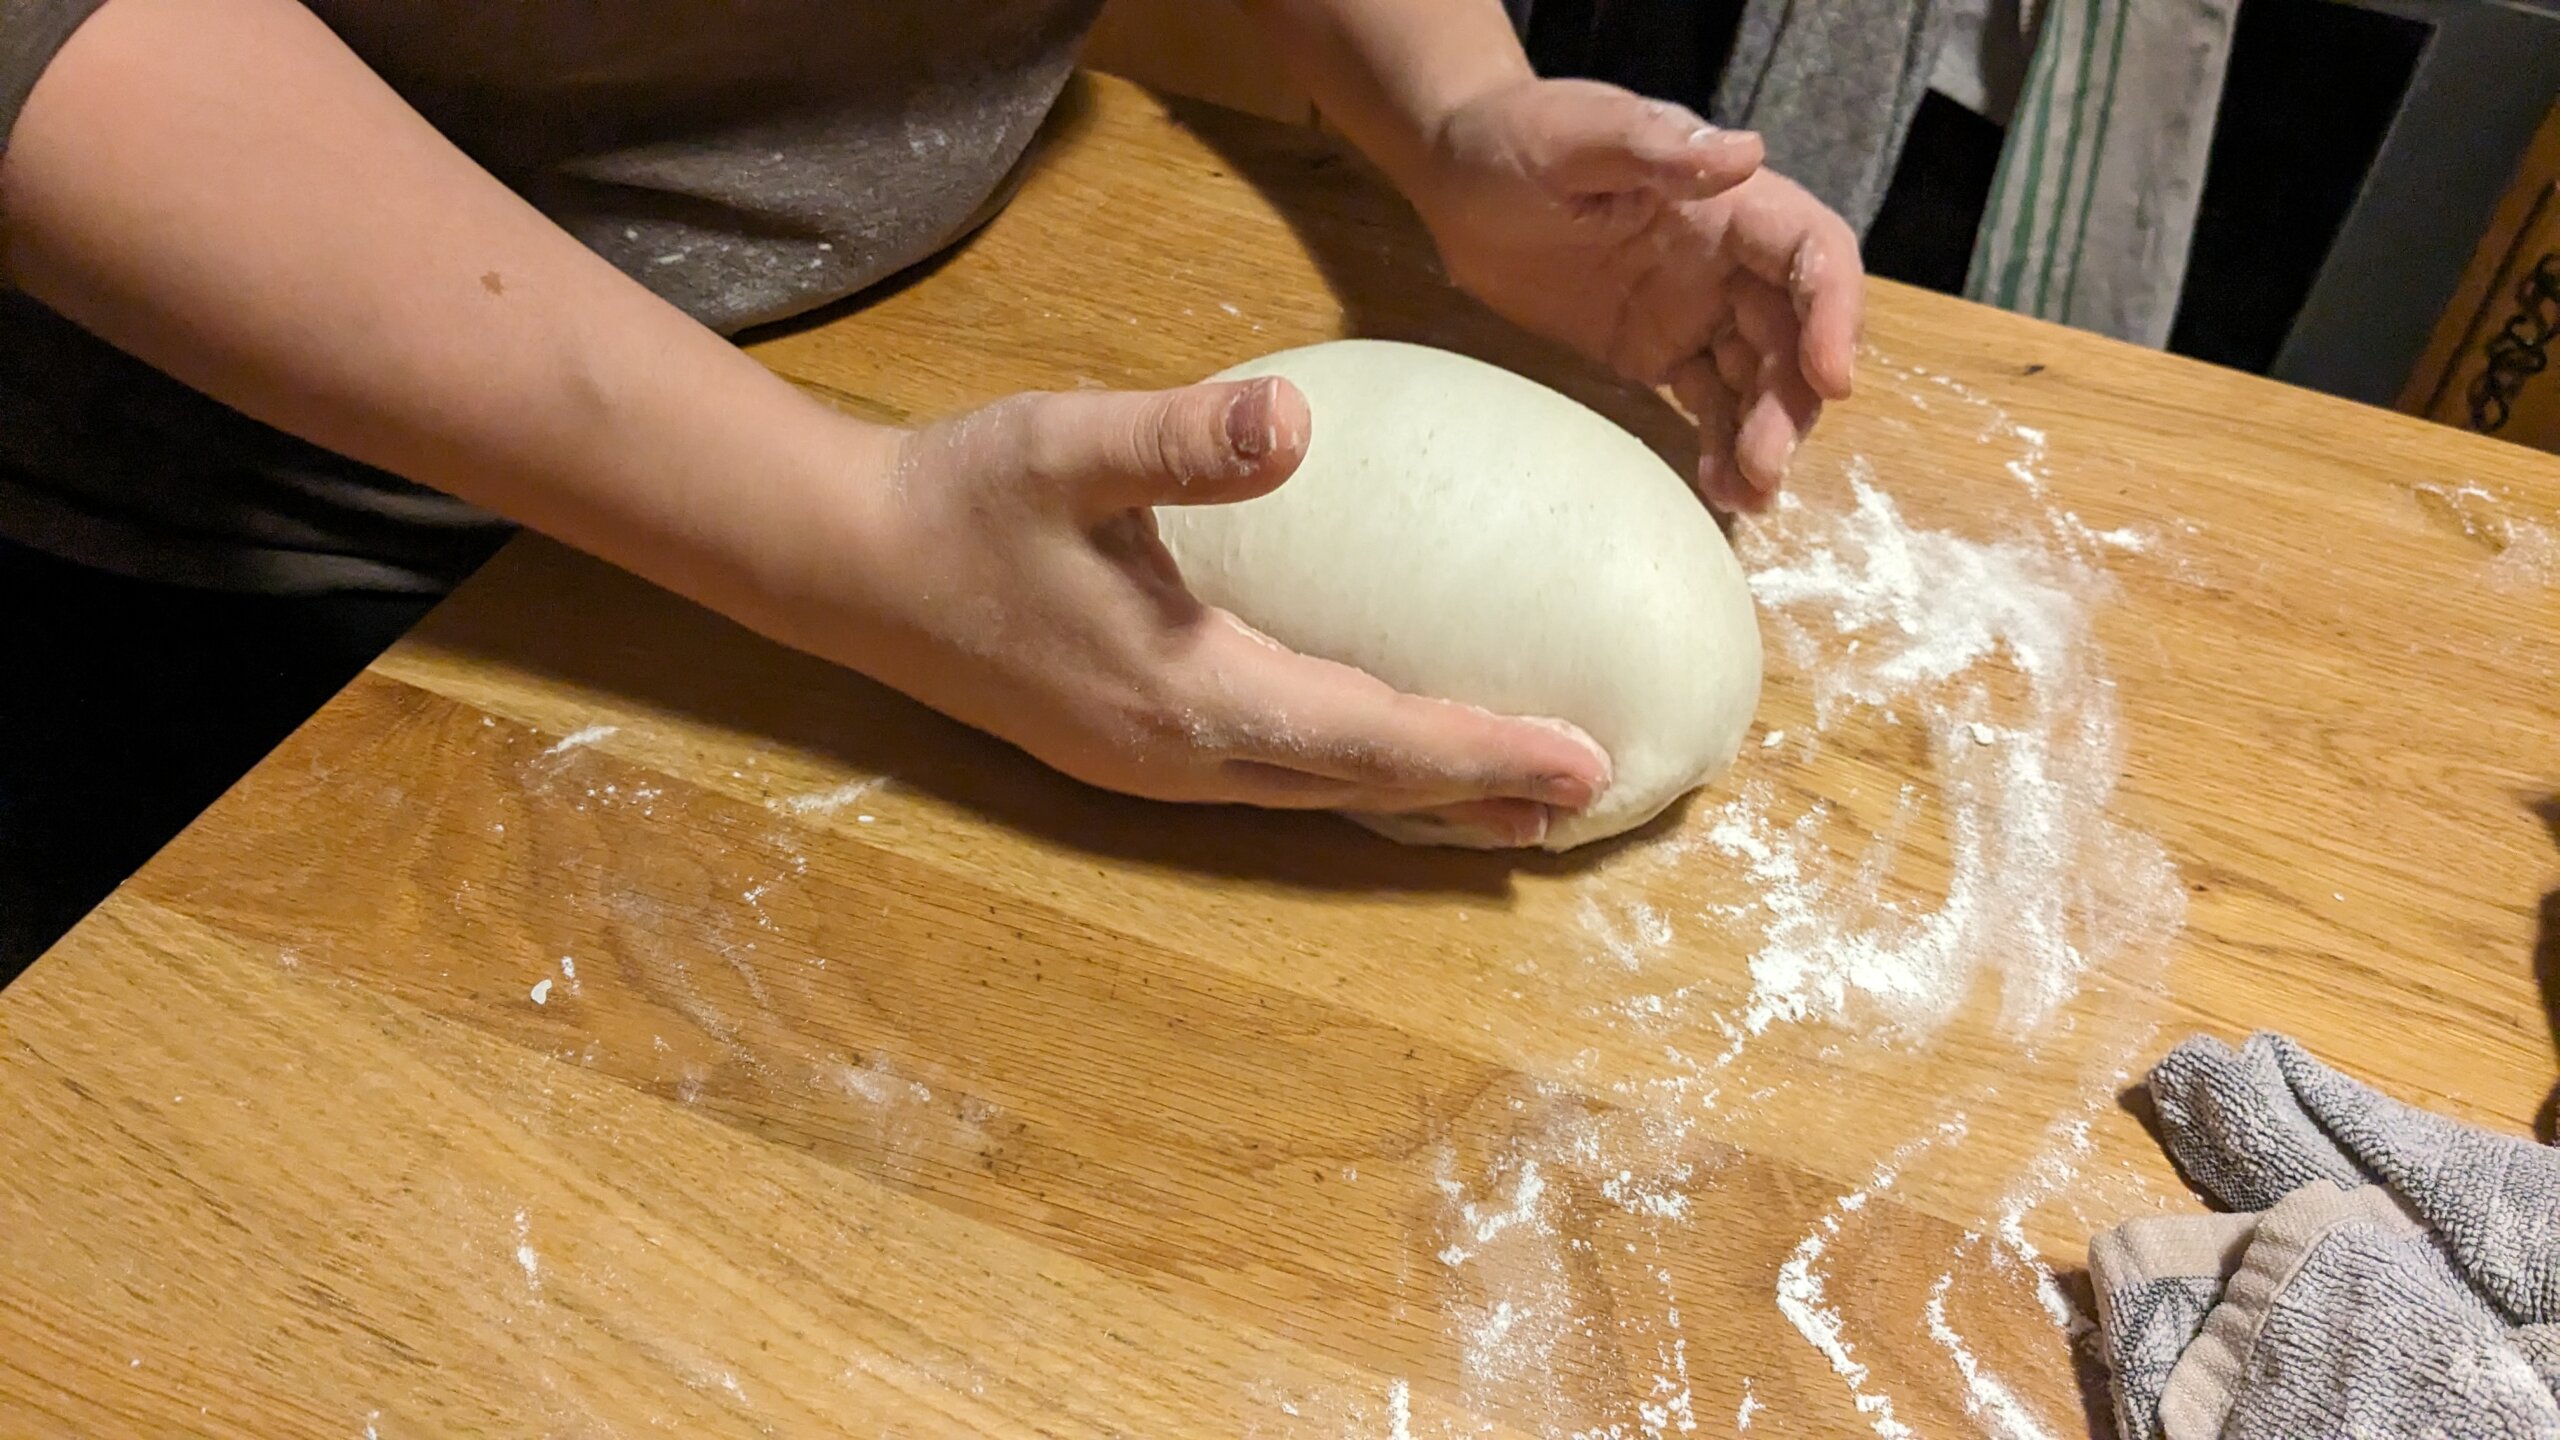 woman twisting a loaf of dough into a round loaf